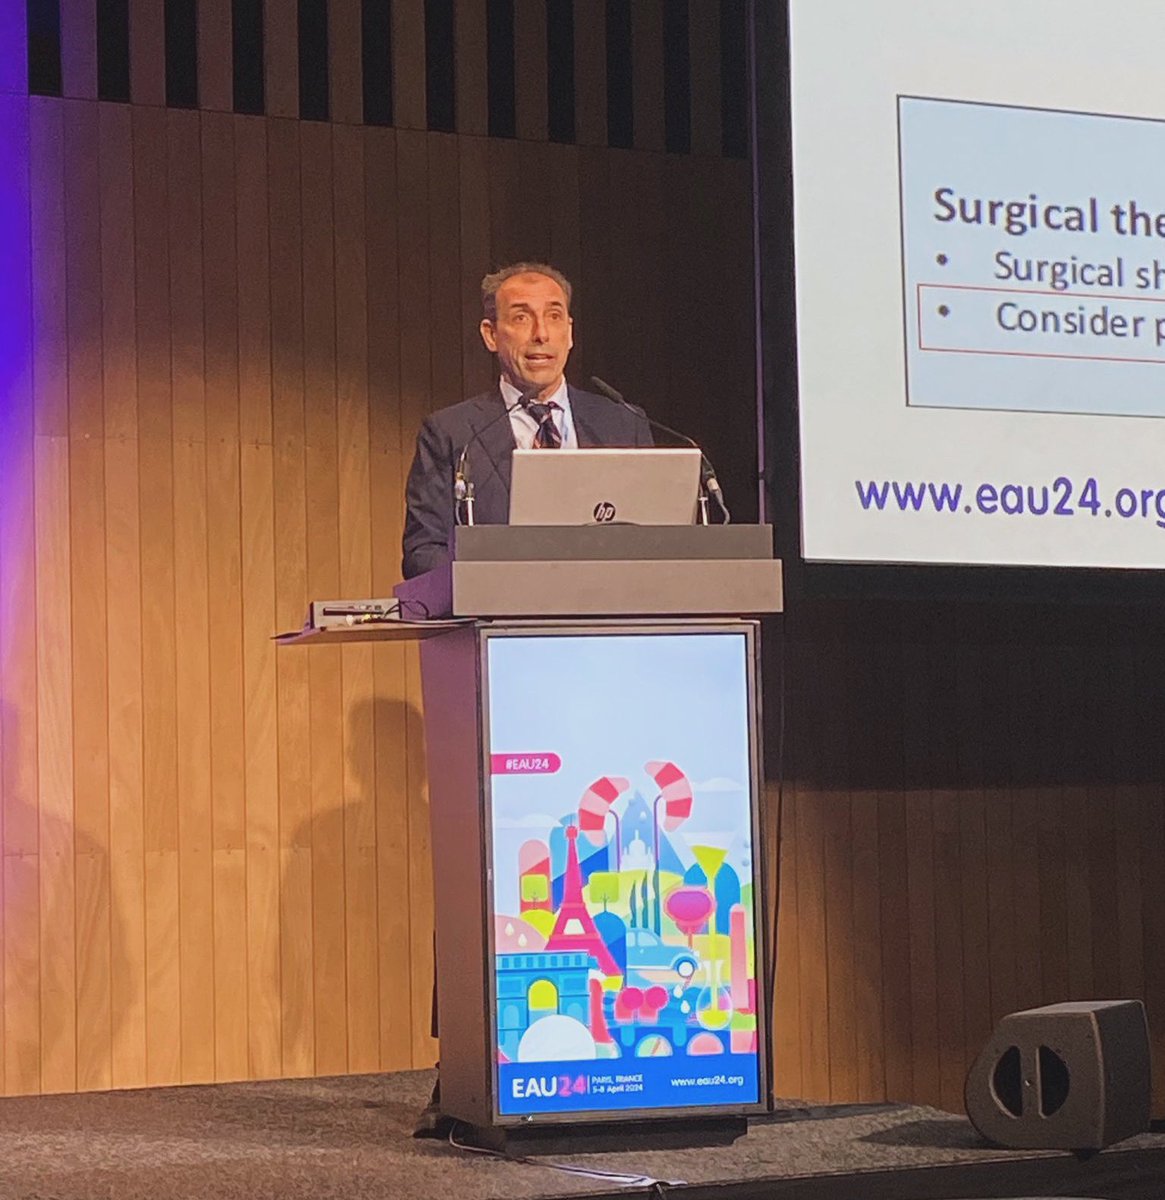 EAU - Congress of the European Society of Urology in Paris, I had the great pleasure and honor of presenting my experience in the treatment of ischemic priapism with #penileprosthesis implantation. @Uroweb